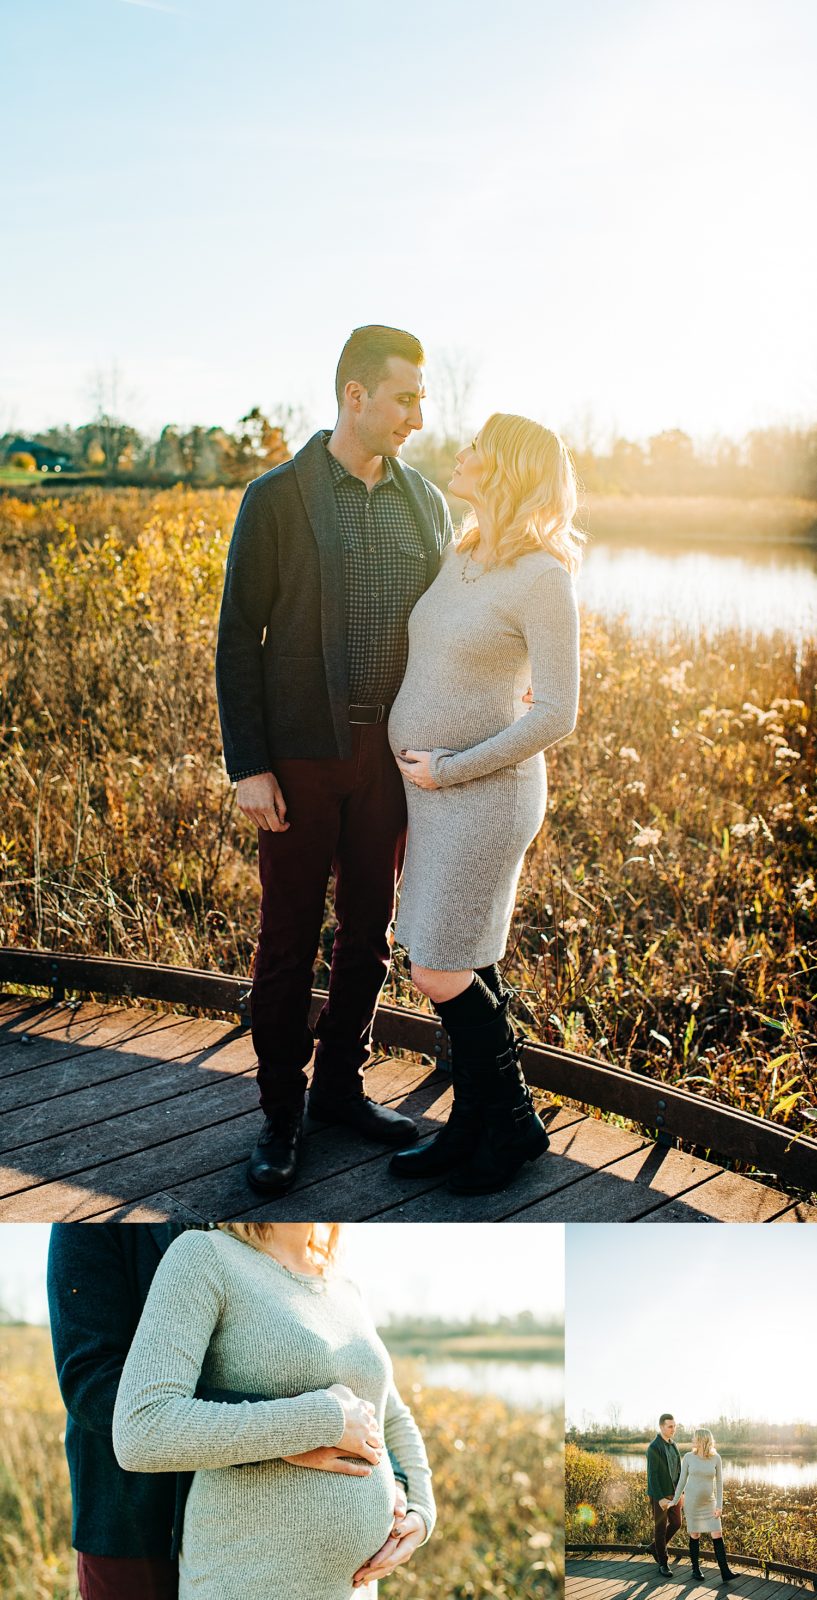 Pregnant woman with her husband near a pond at golden hour, holding her belly.